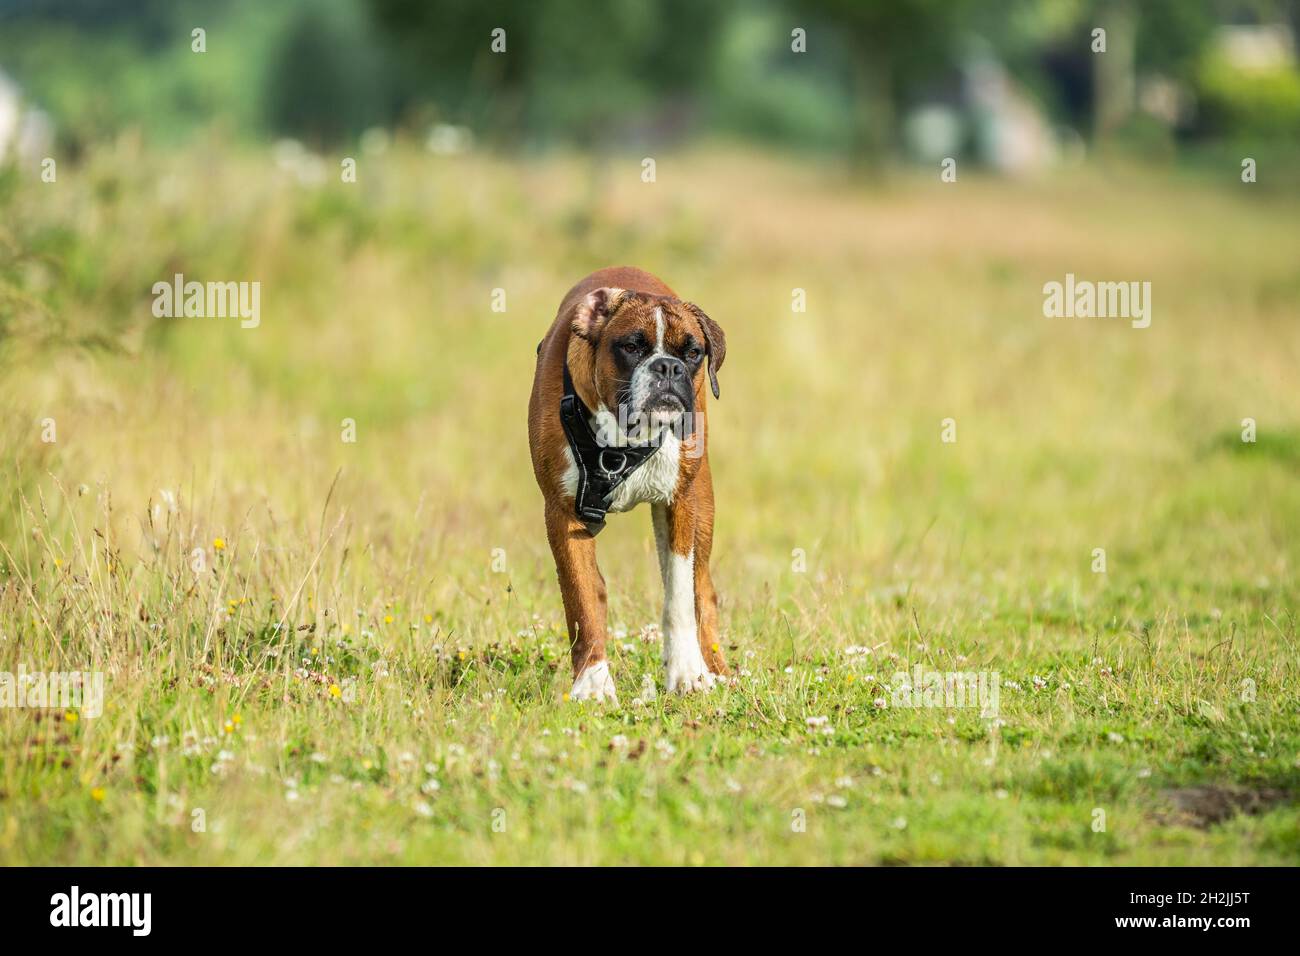 Brown black white Boxer dog with harness standing still in grass looking at the photographer surrounds with blurred foreground and background Stock Photo